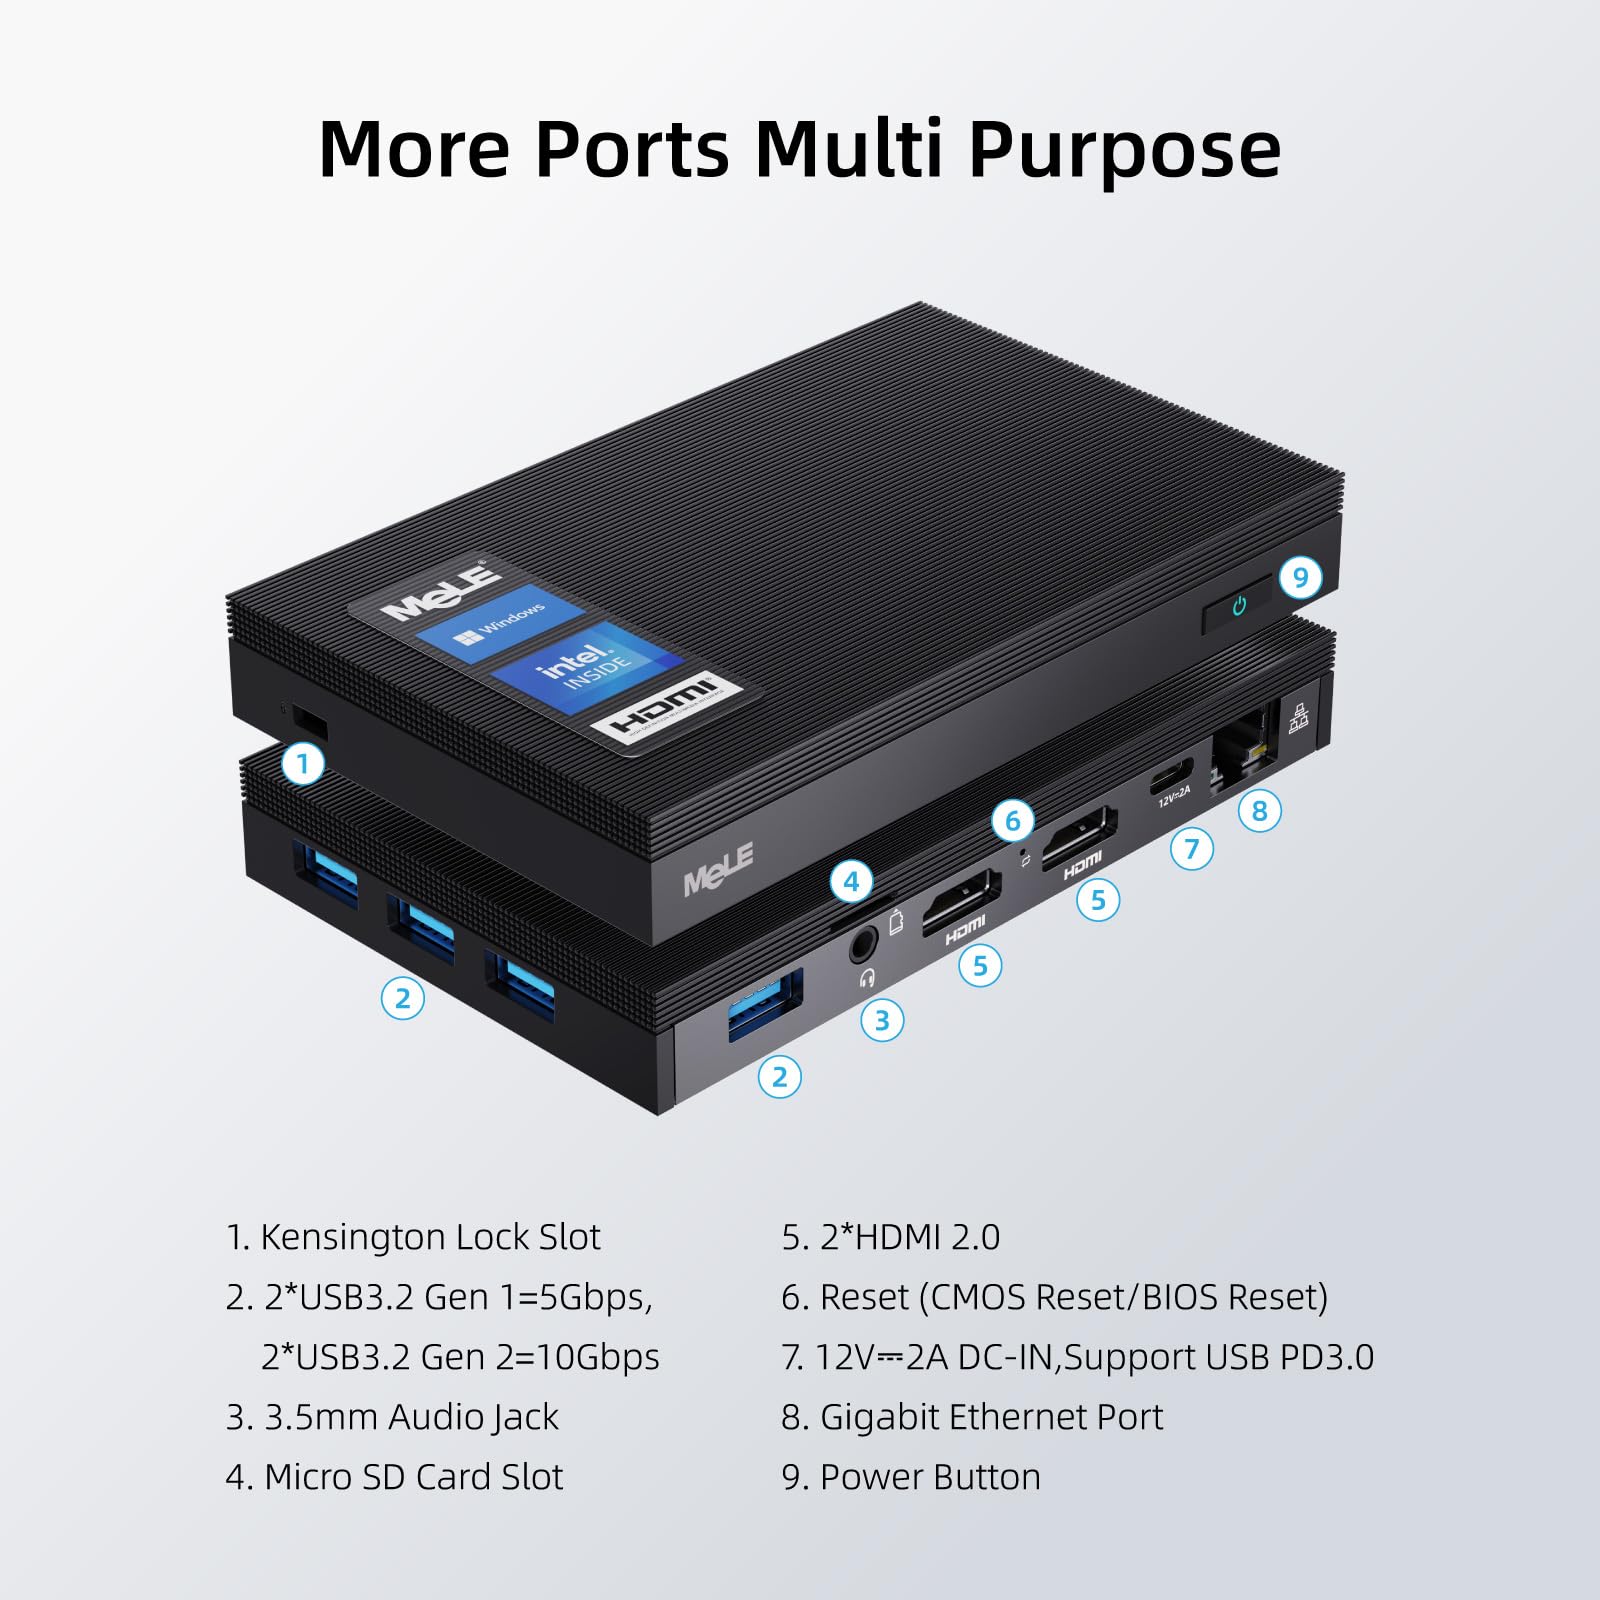 MeLE Fanless Mini PC Quieter3Q 11th Gen N5105 8GB 256GB Windows 11 Pro Micro Computer WiFi 6 Small Desktop Service with USB-C PD, Gigabit Ethernet, Dual HDMI 4K, Auto Power on, PXE Support M.2 SSD